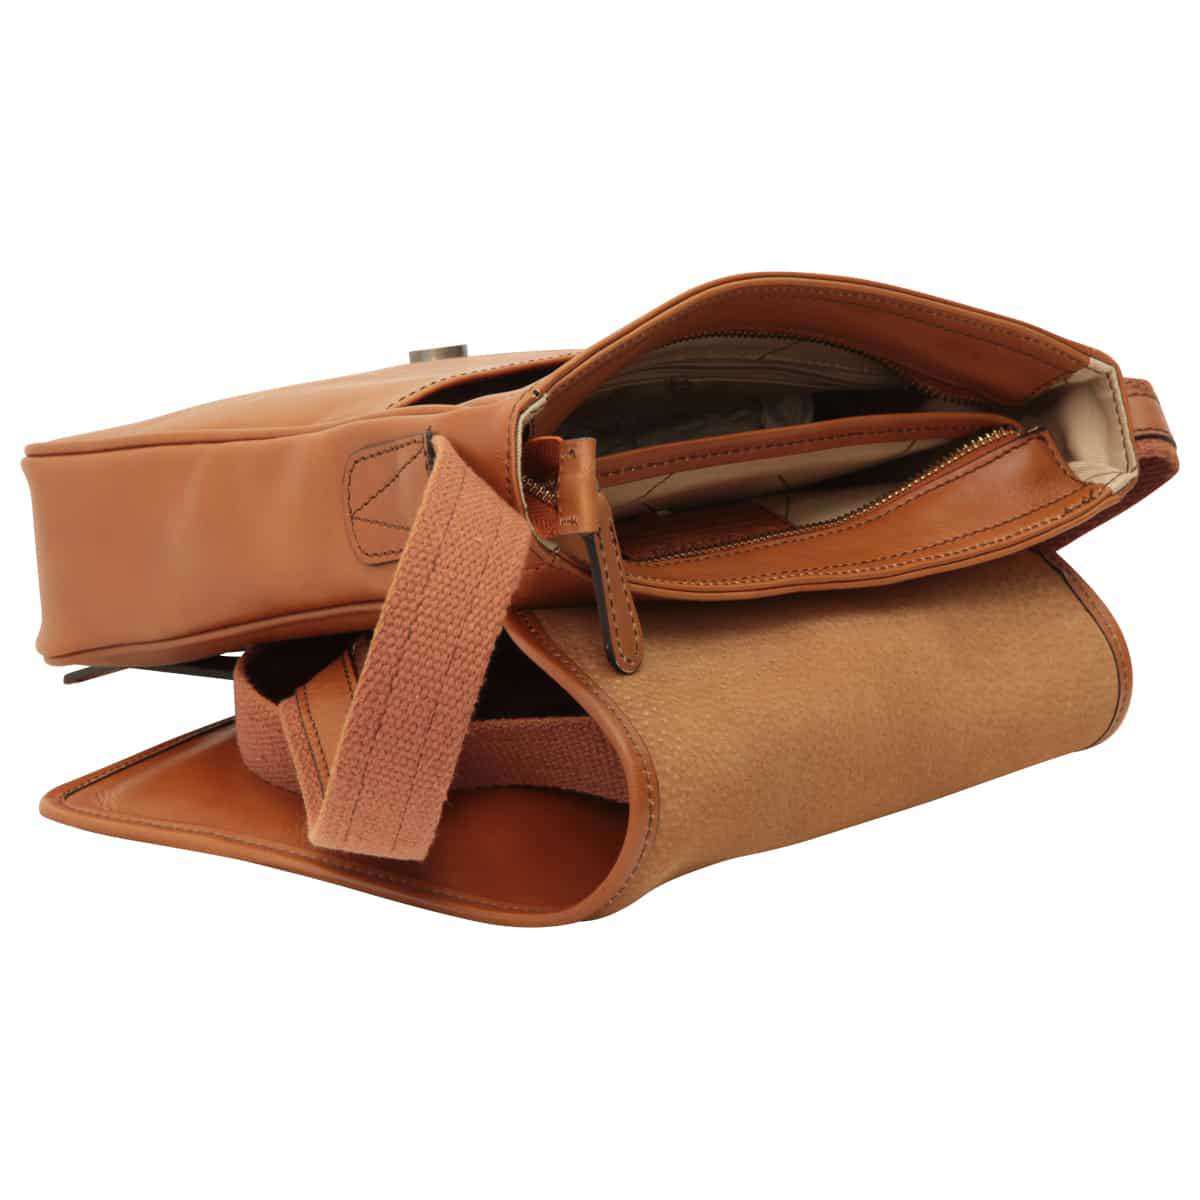 Small leather bag with magnetic closure - Brown Colonial | 406689CO US | Old Angler Firenze